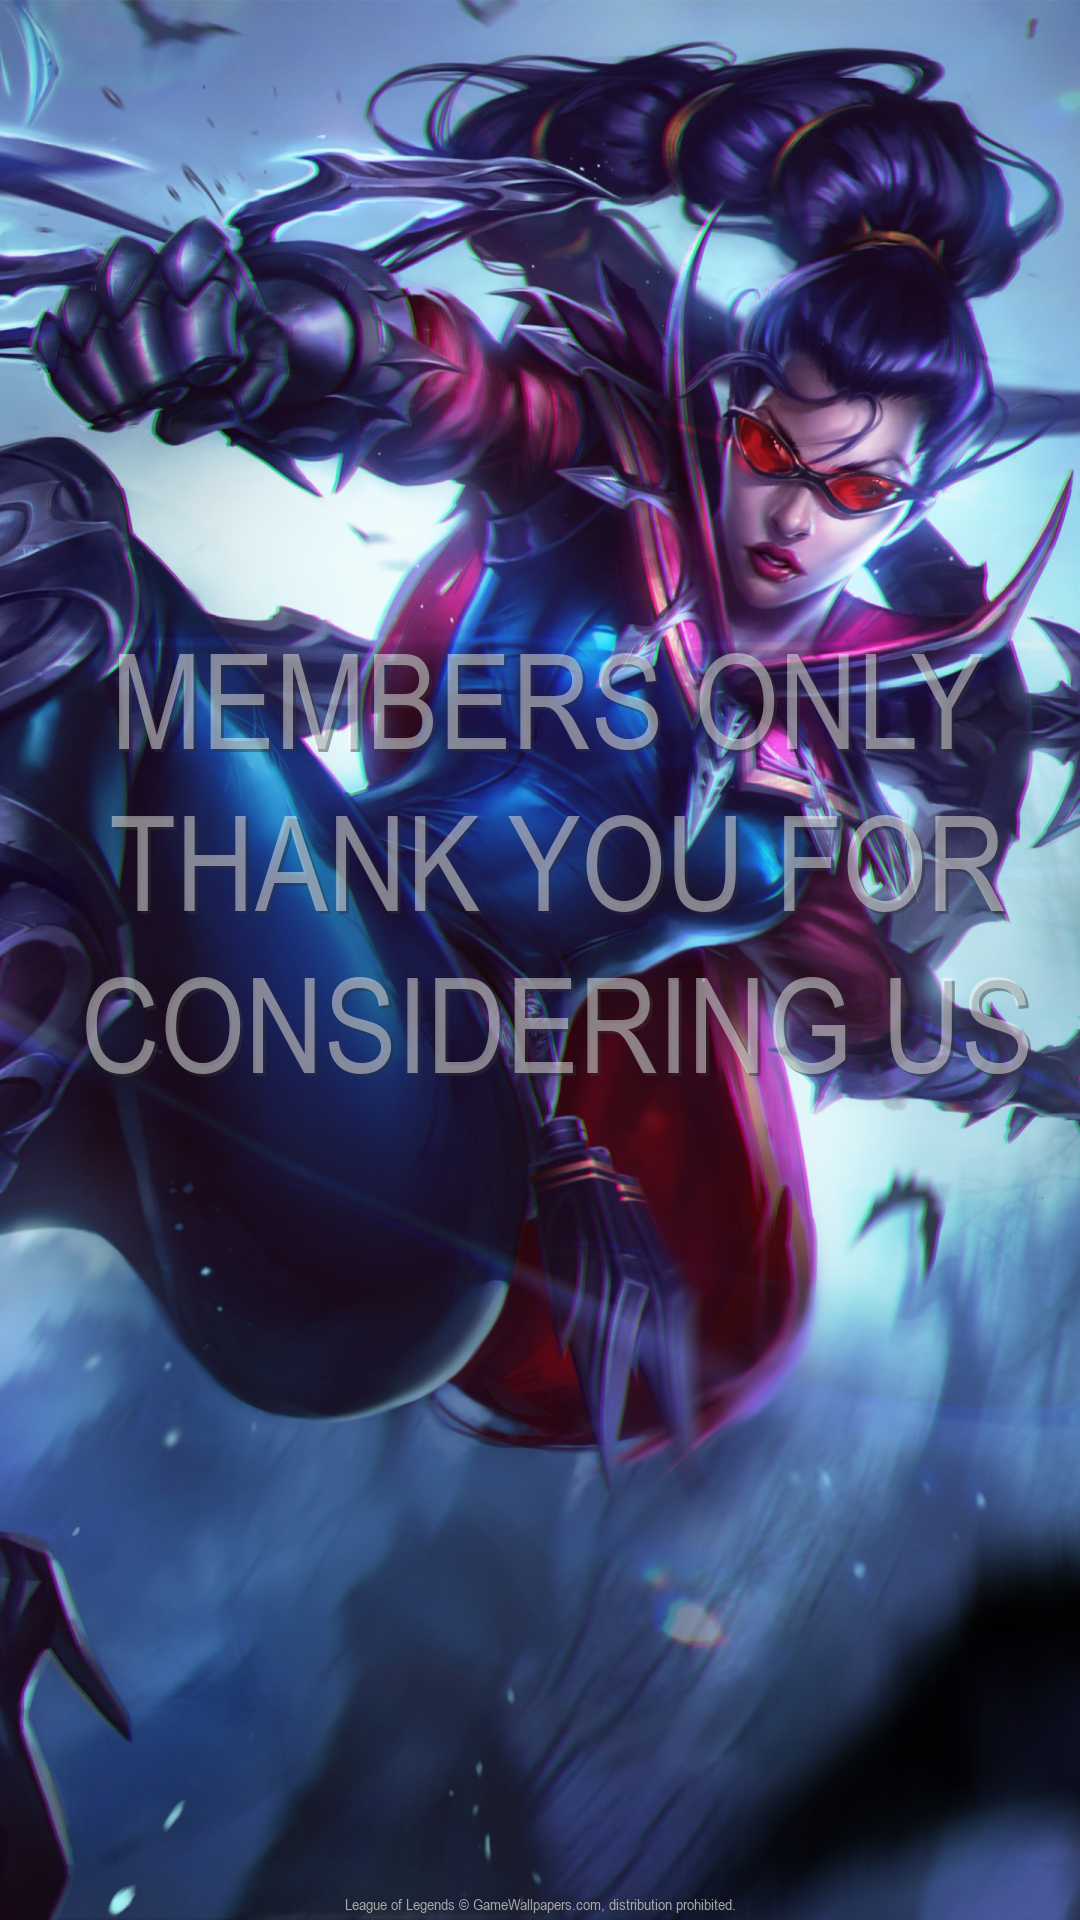 League of Legends 1080p Vertical Mobile wallpaper or background 55